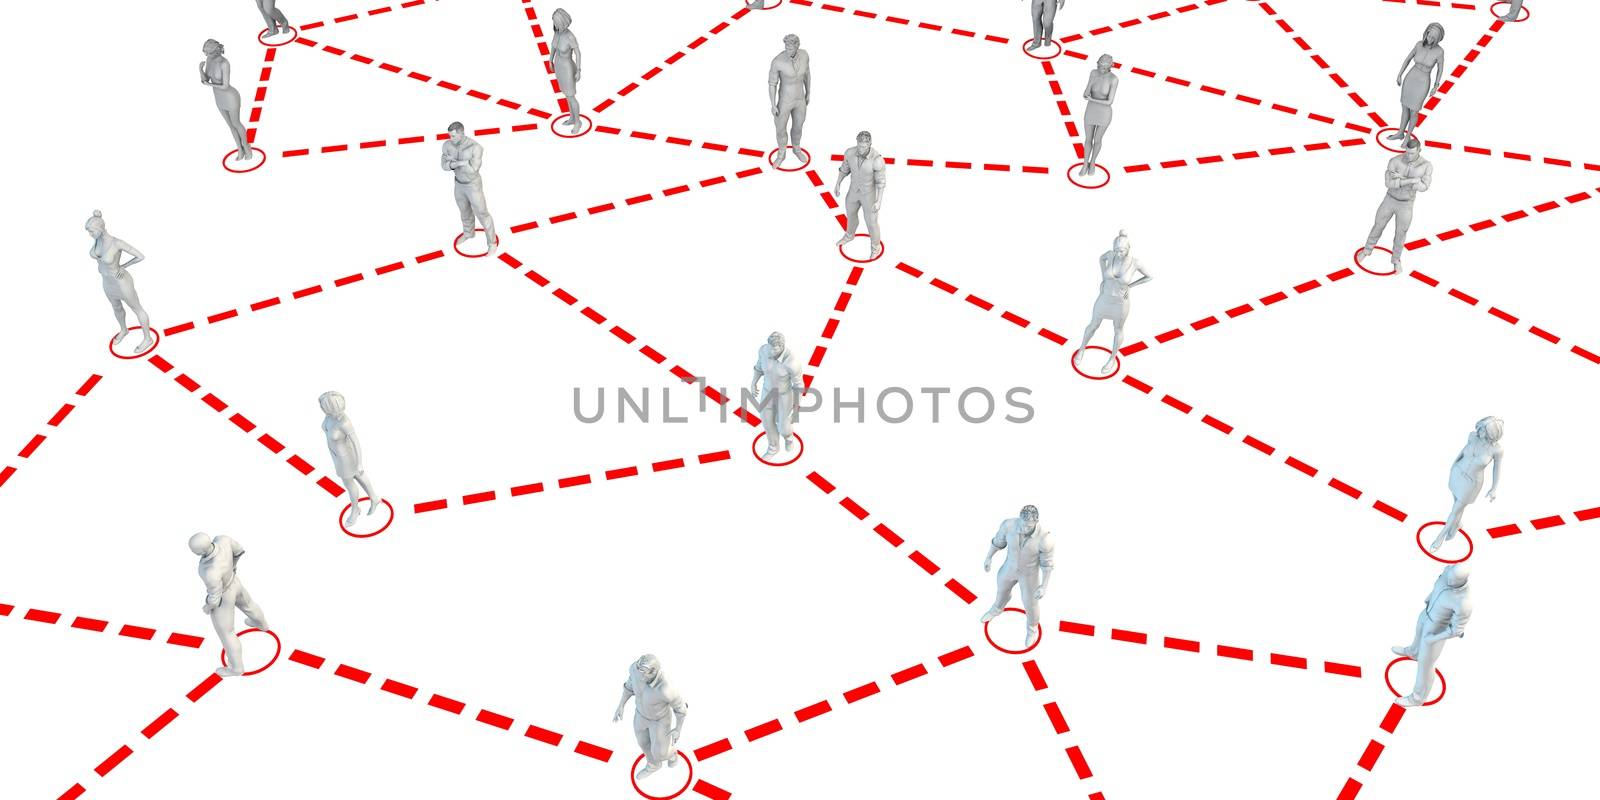 Human Figures Connected by kentoh